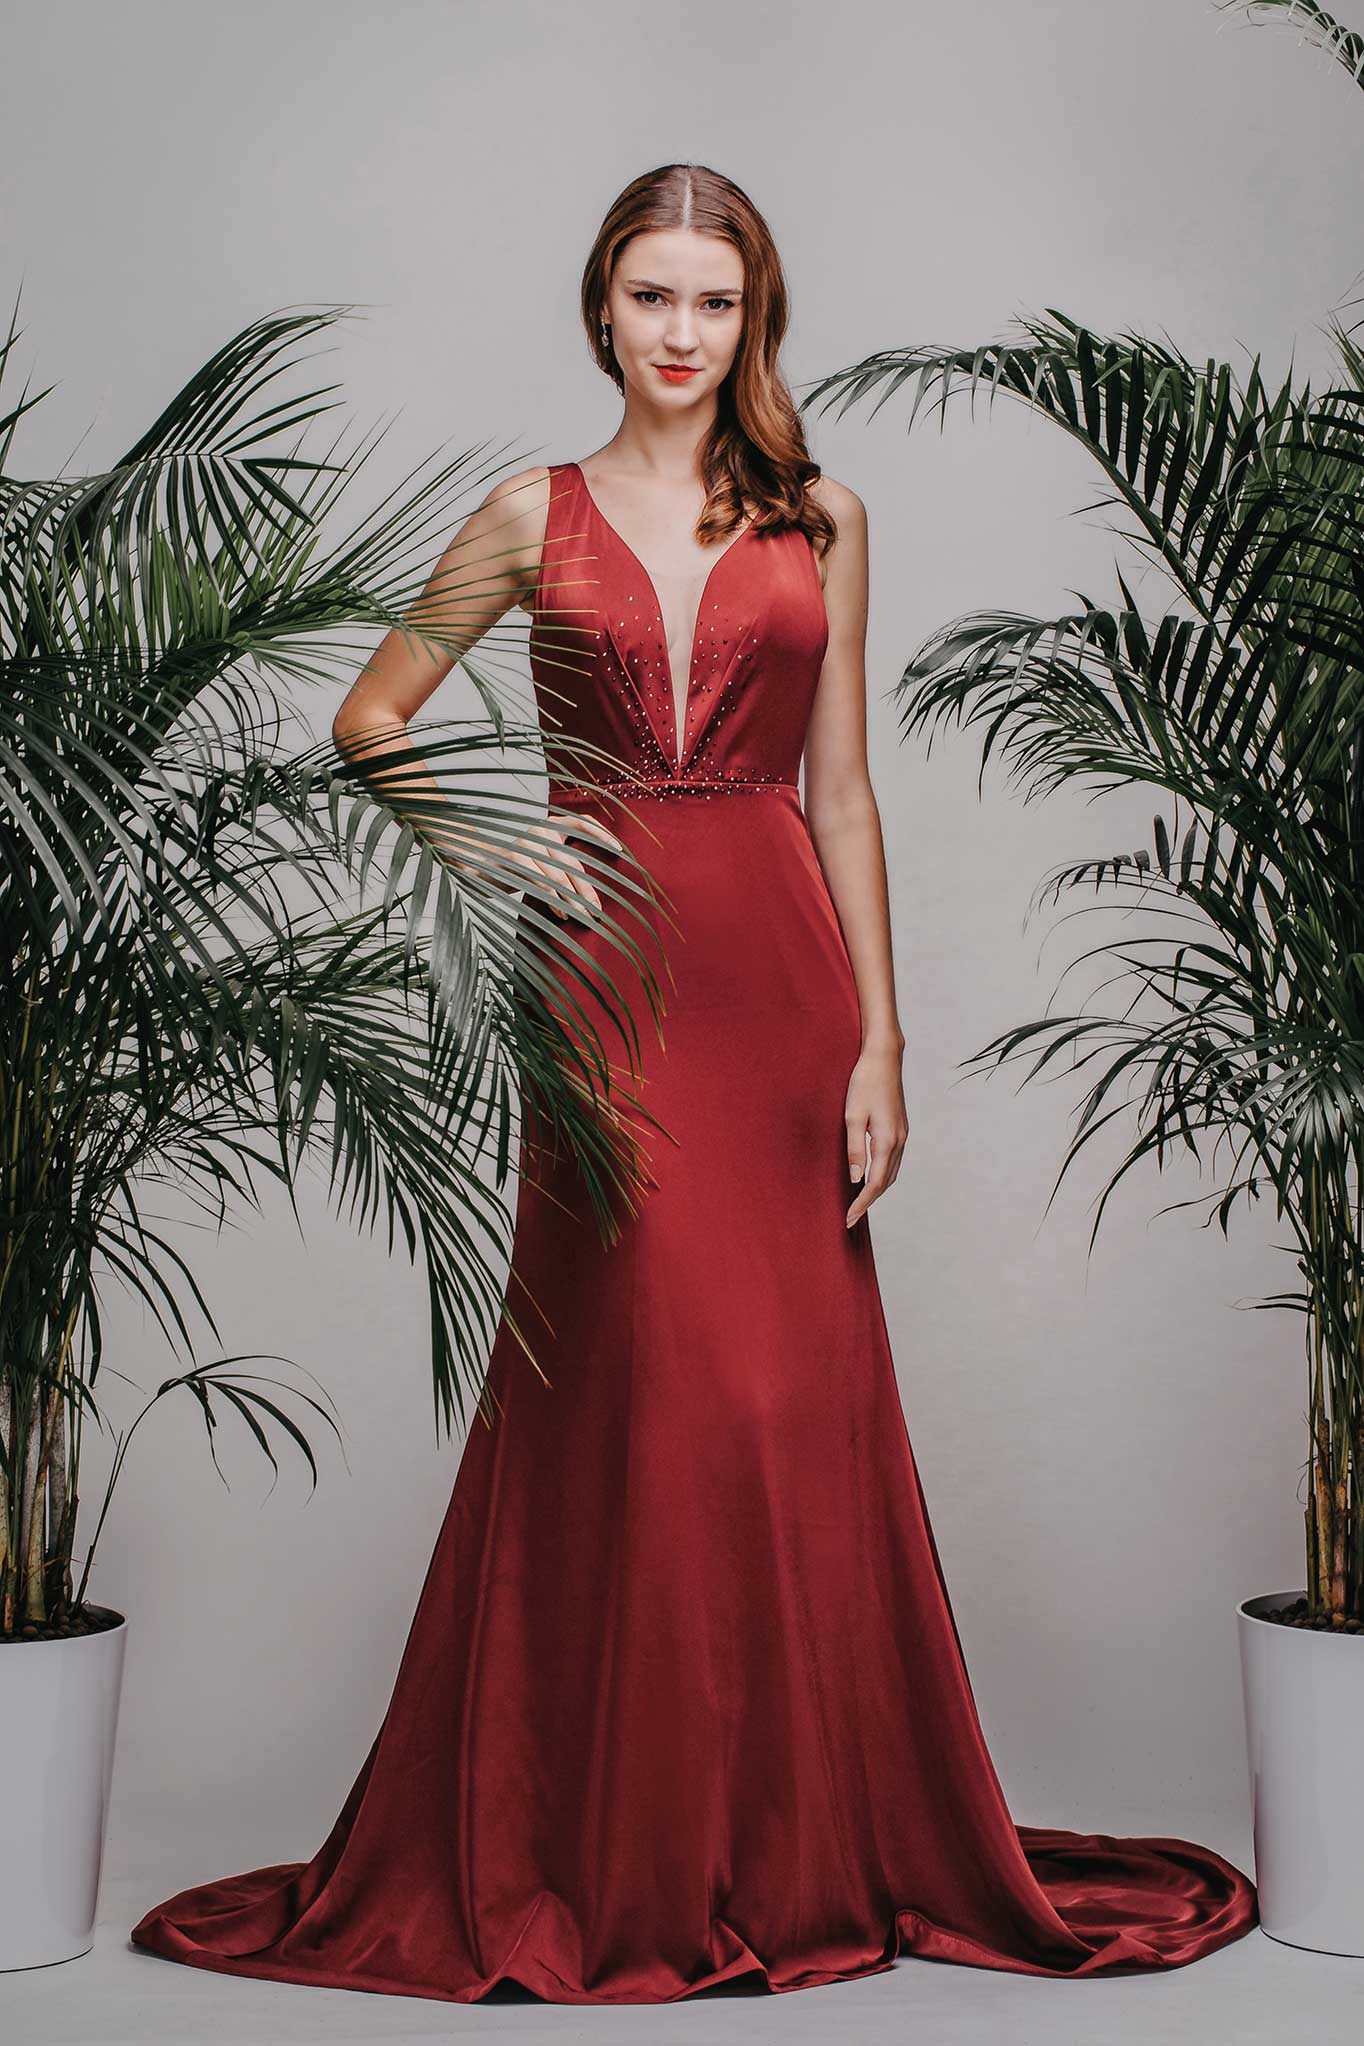 Odeliabridal-gown-collection-26_